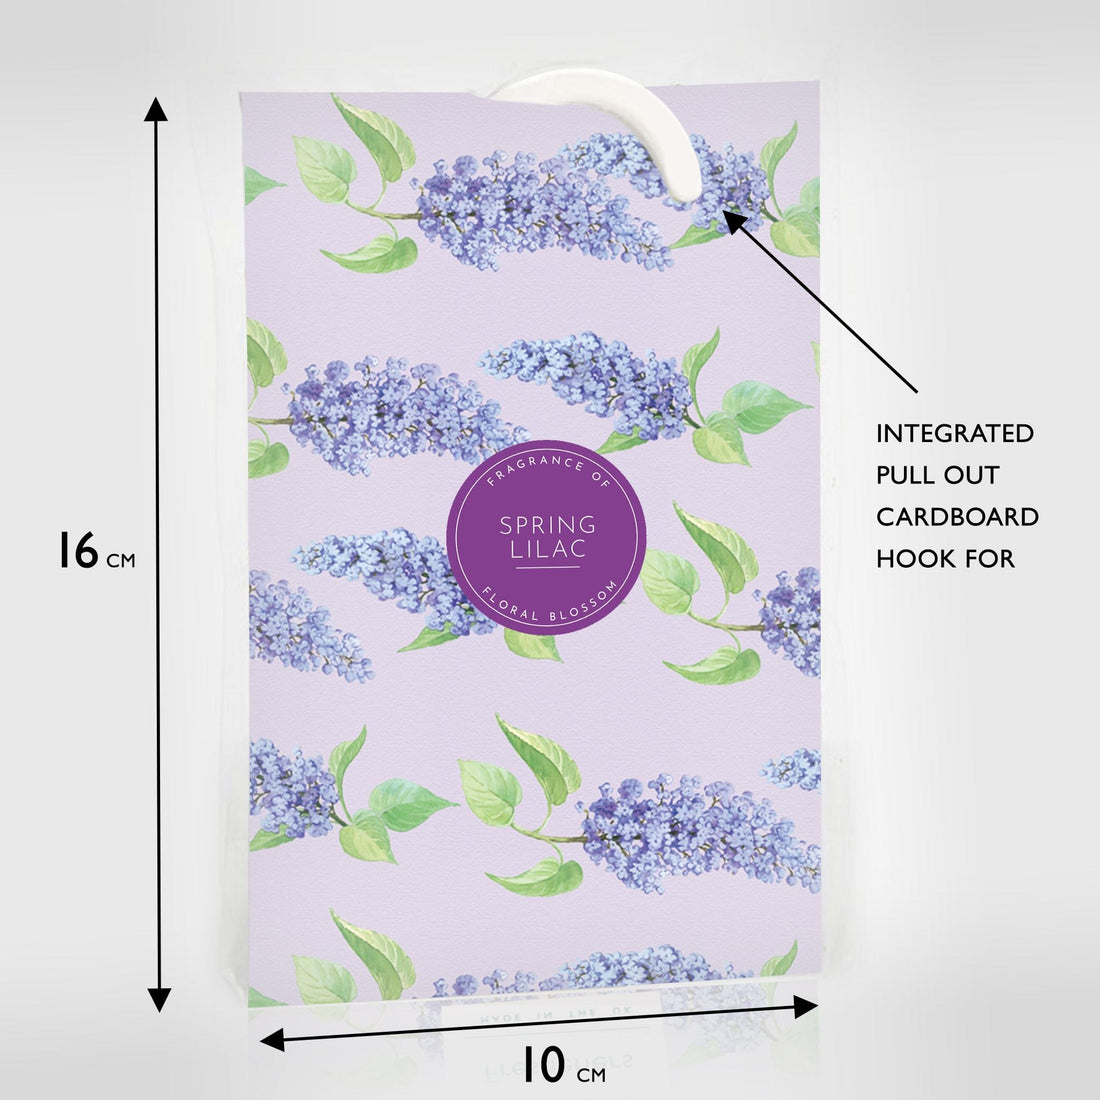 THE MASTER HERBALIST | LILAC Scented Wardrobe Freshener in a Traditional Floral Design.